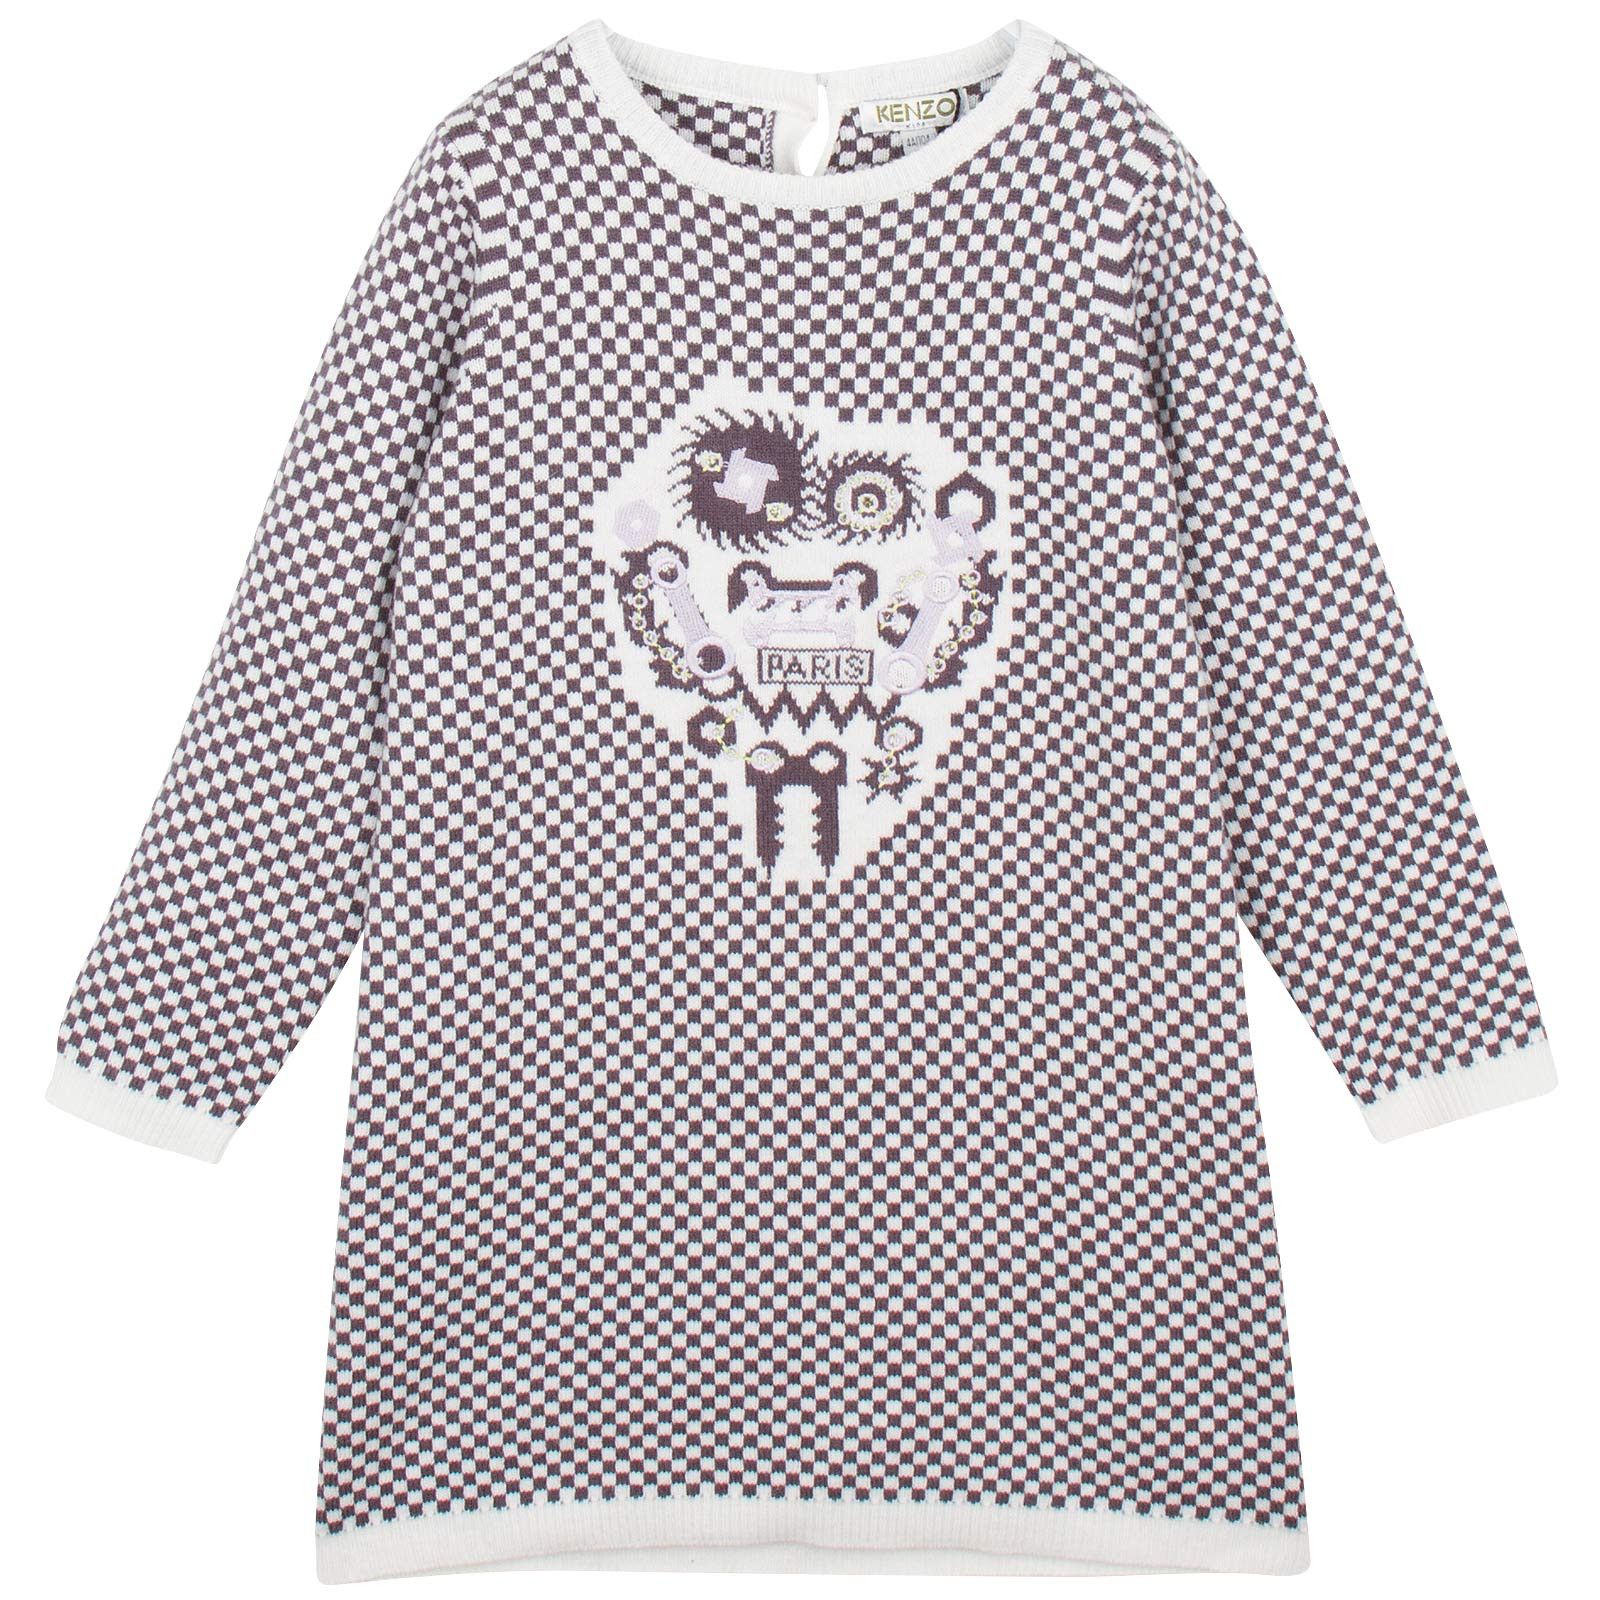 Baby Girls Grey&White Monster Embroidered Kintted Sweater Dress - CÉMAROSE | Children's Fashion Store - 1